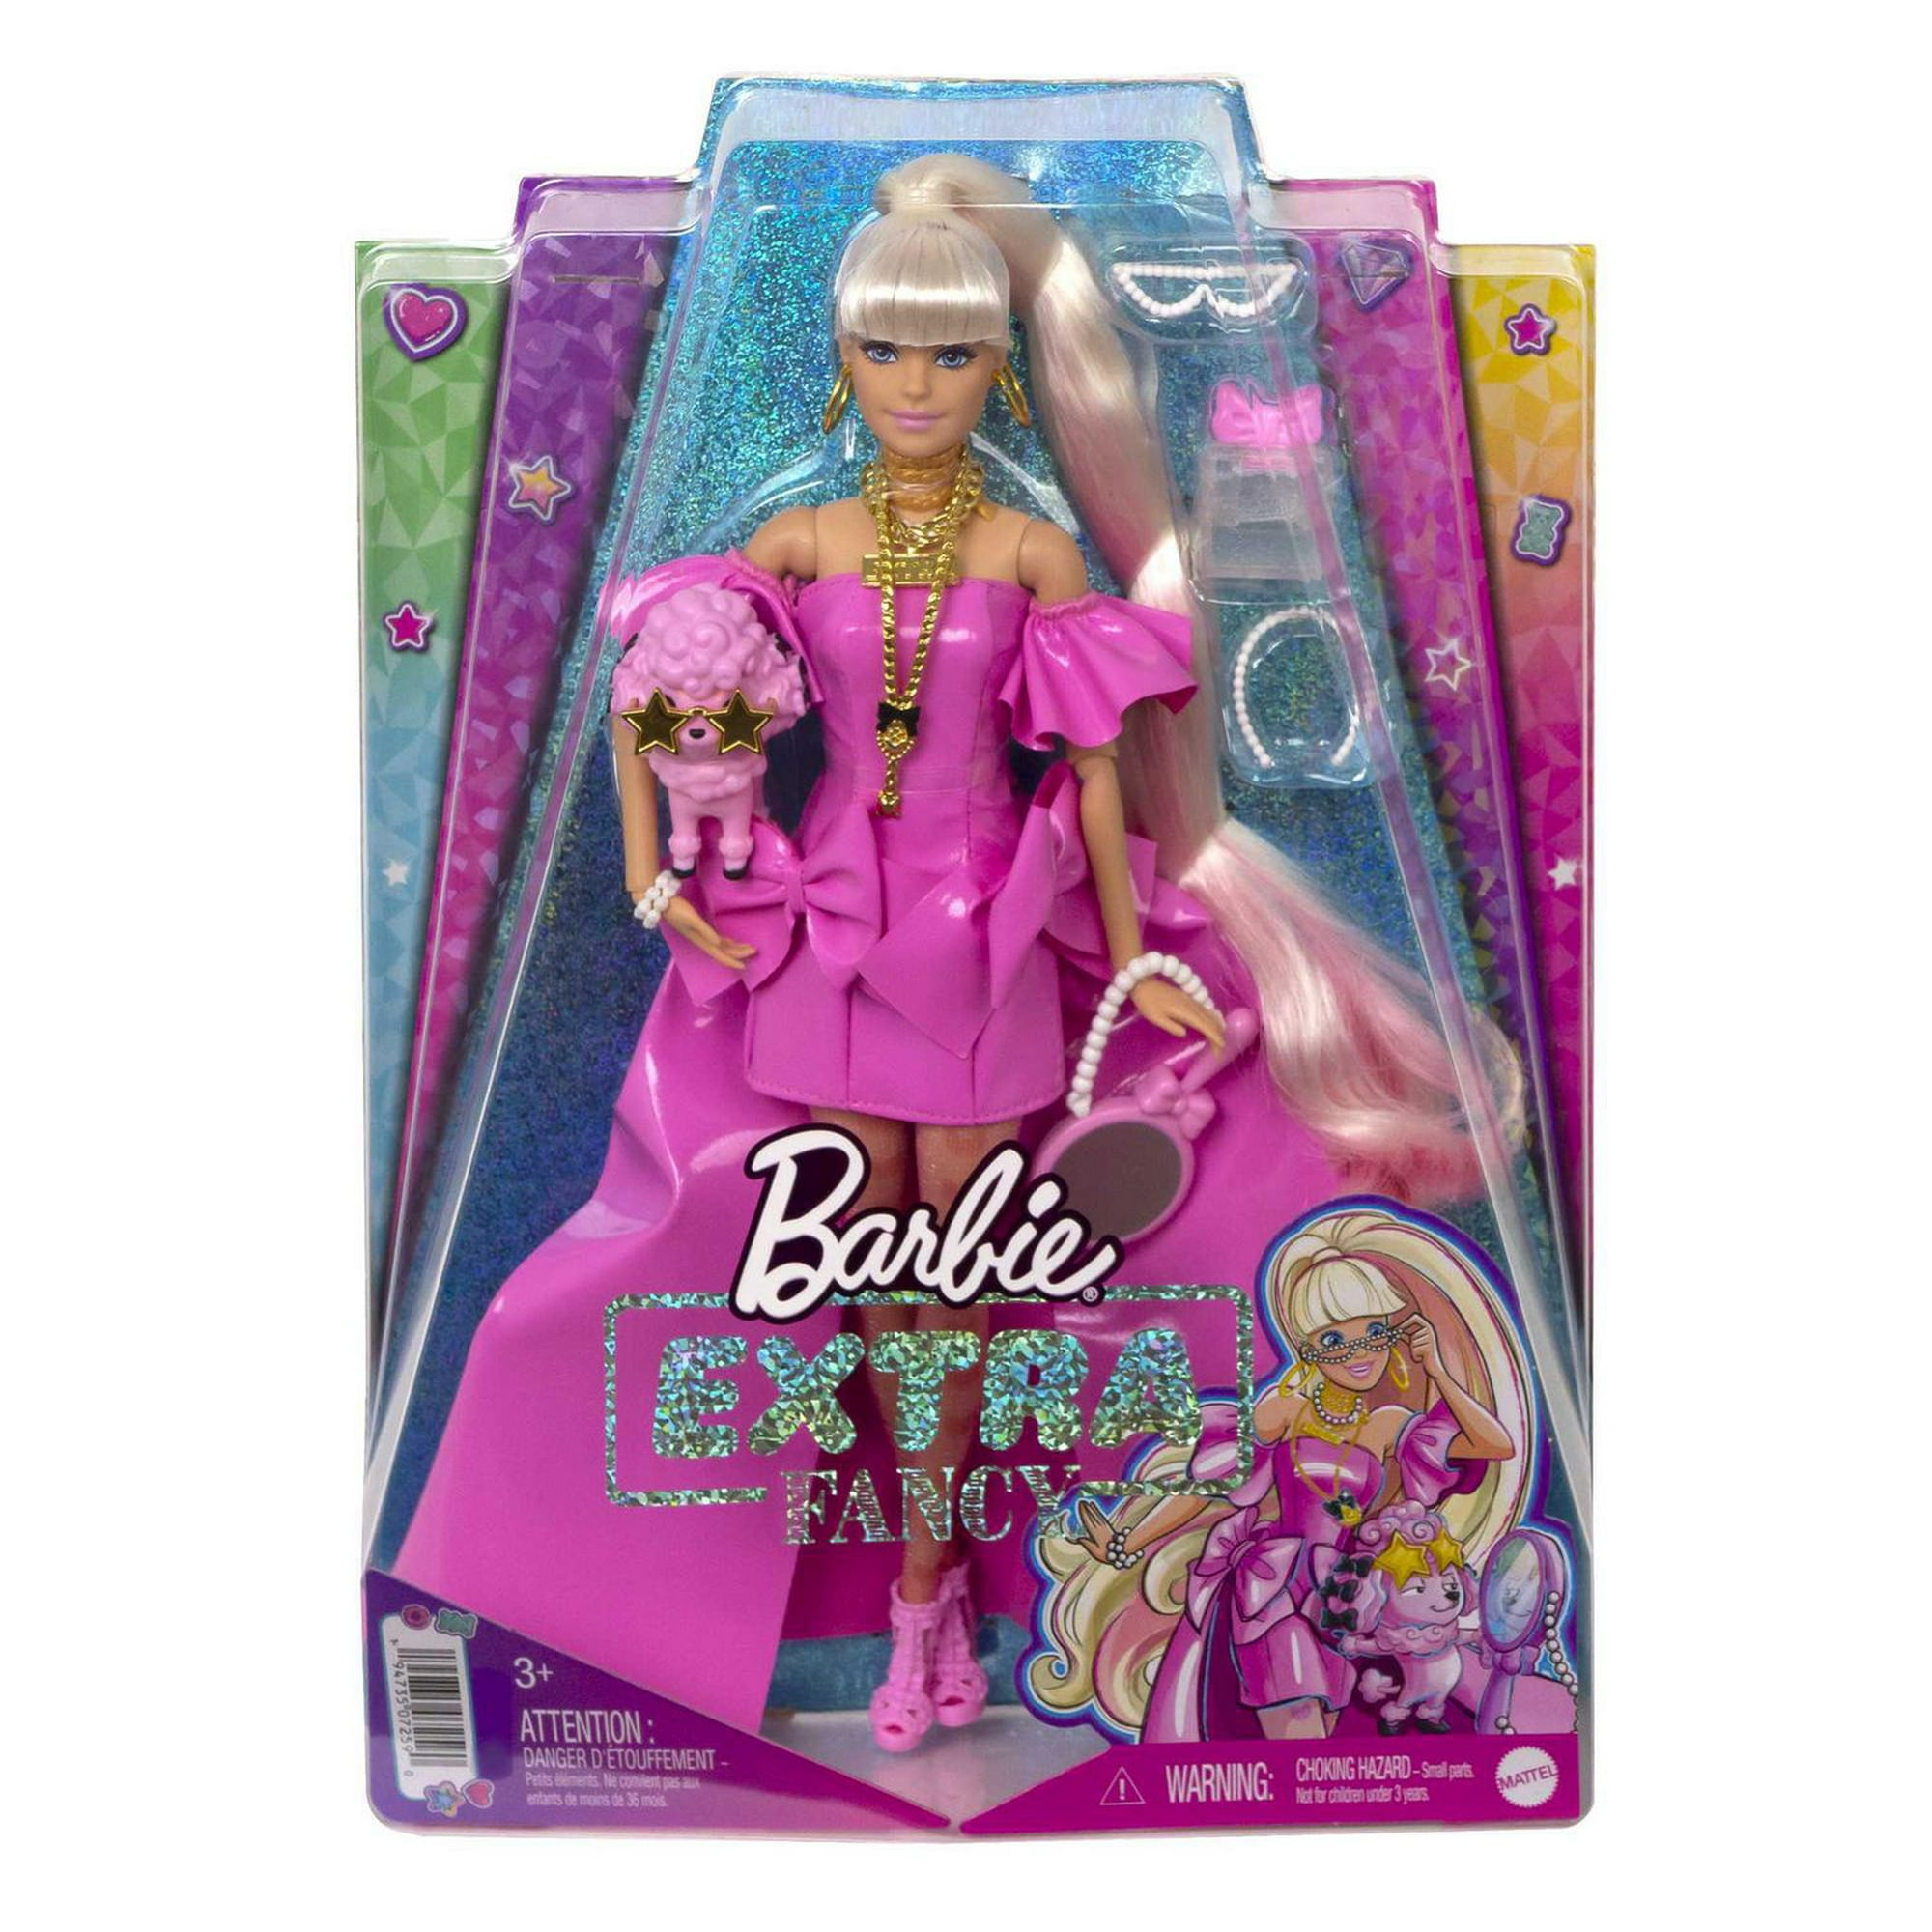 Collector Edition Barbie Totally Pink Designer Tights & shoes.